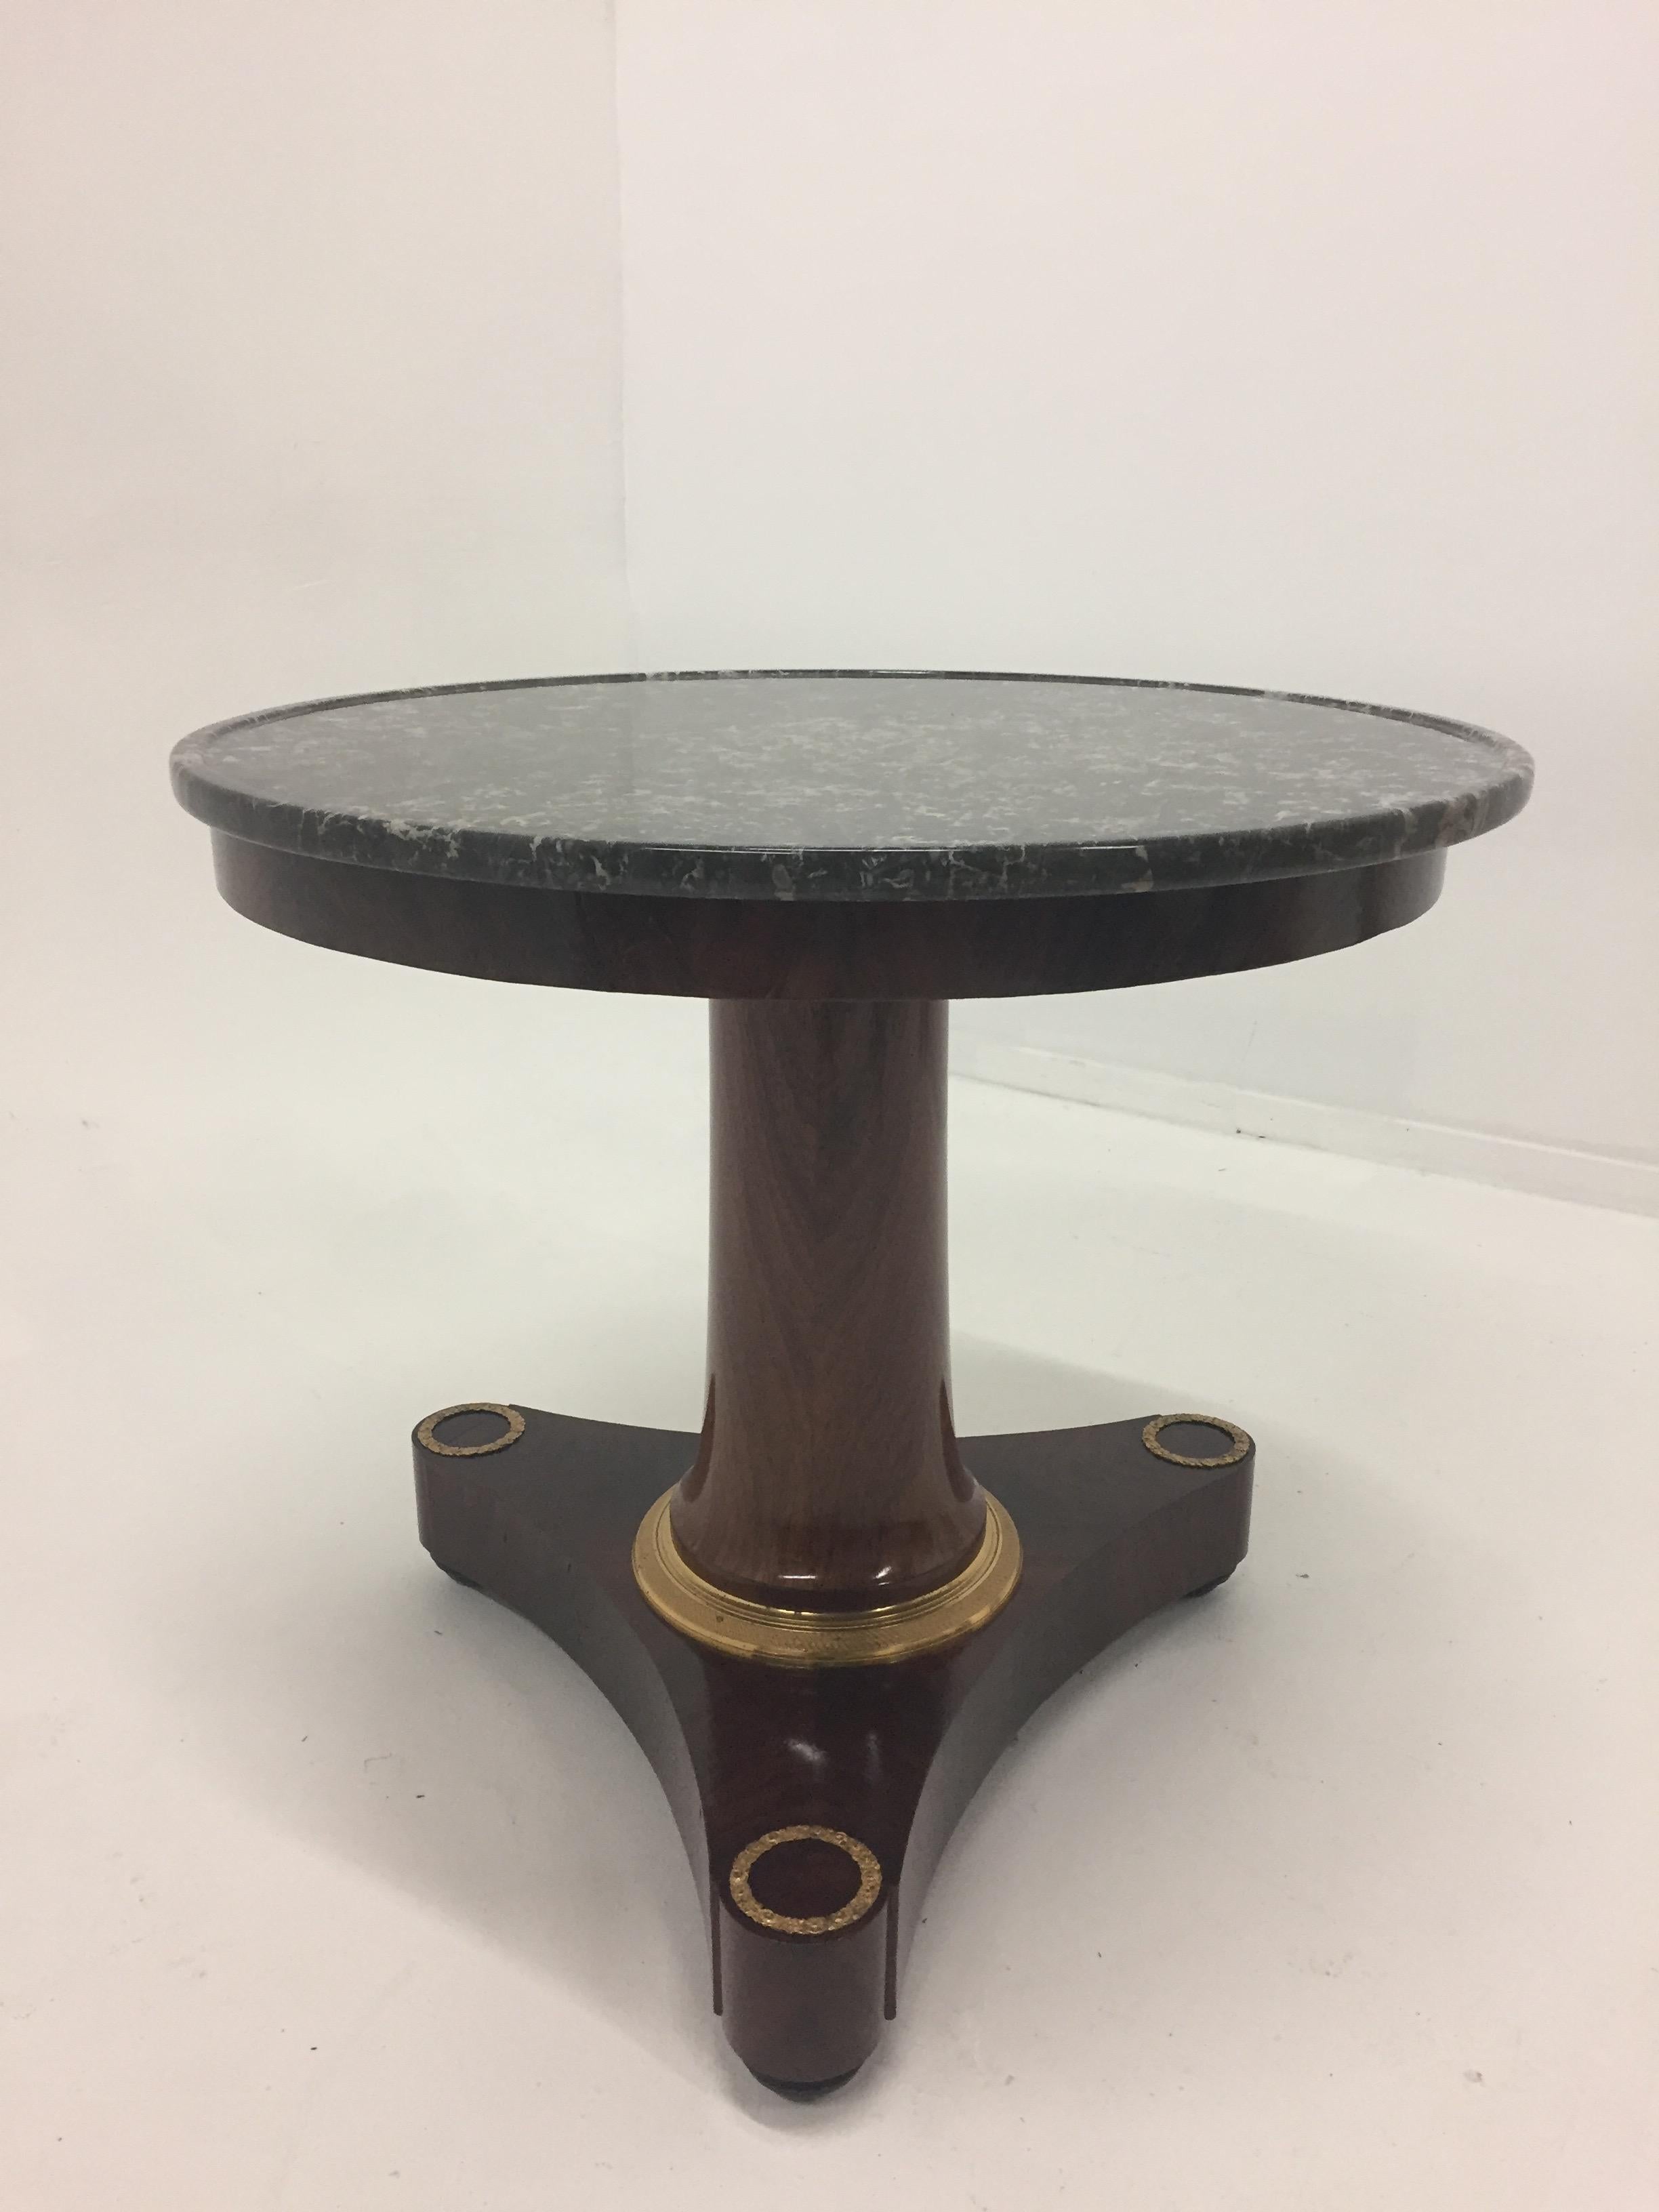 Impressively elegant and versatile round mahogany table having beautiful bronze mounts, ebonized bun feet and a handsome dark grey marble top with cream veining running through it finished with a honed edge.